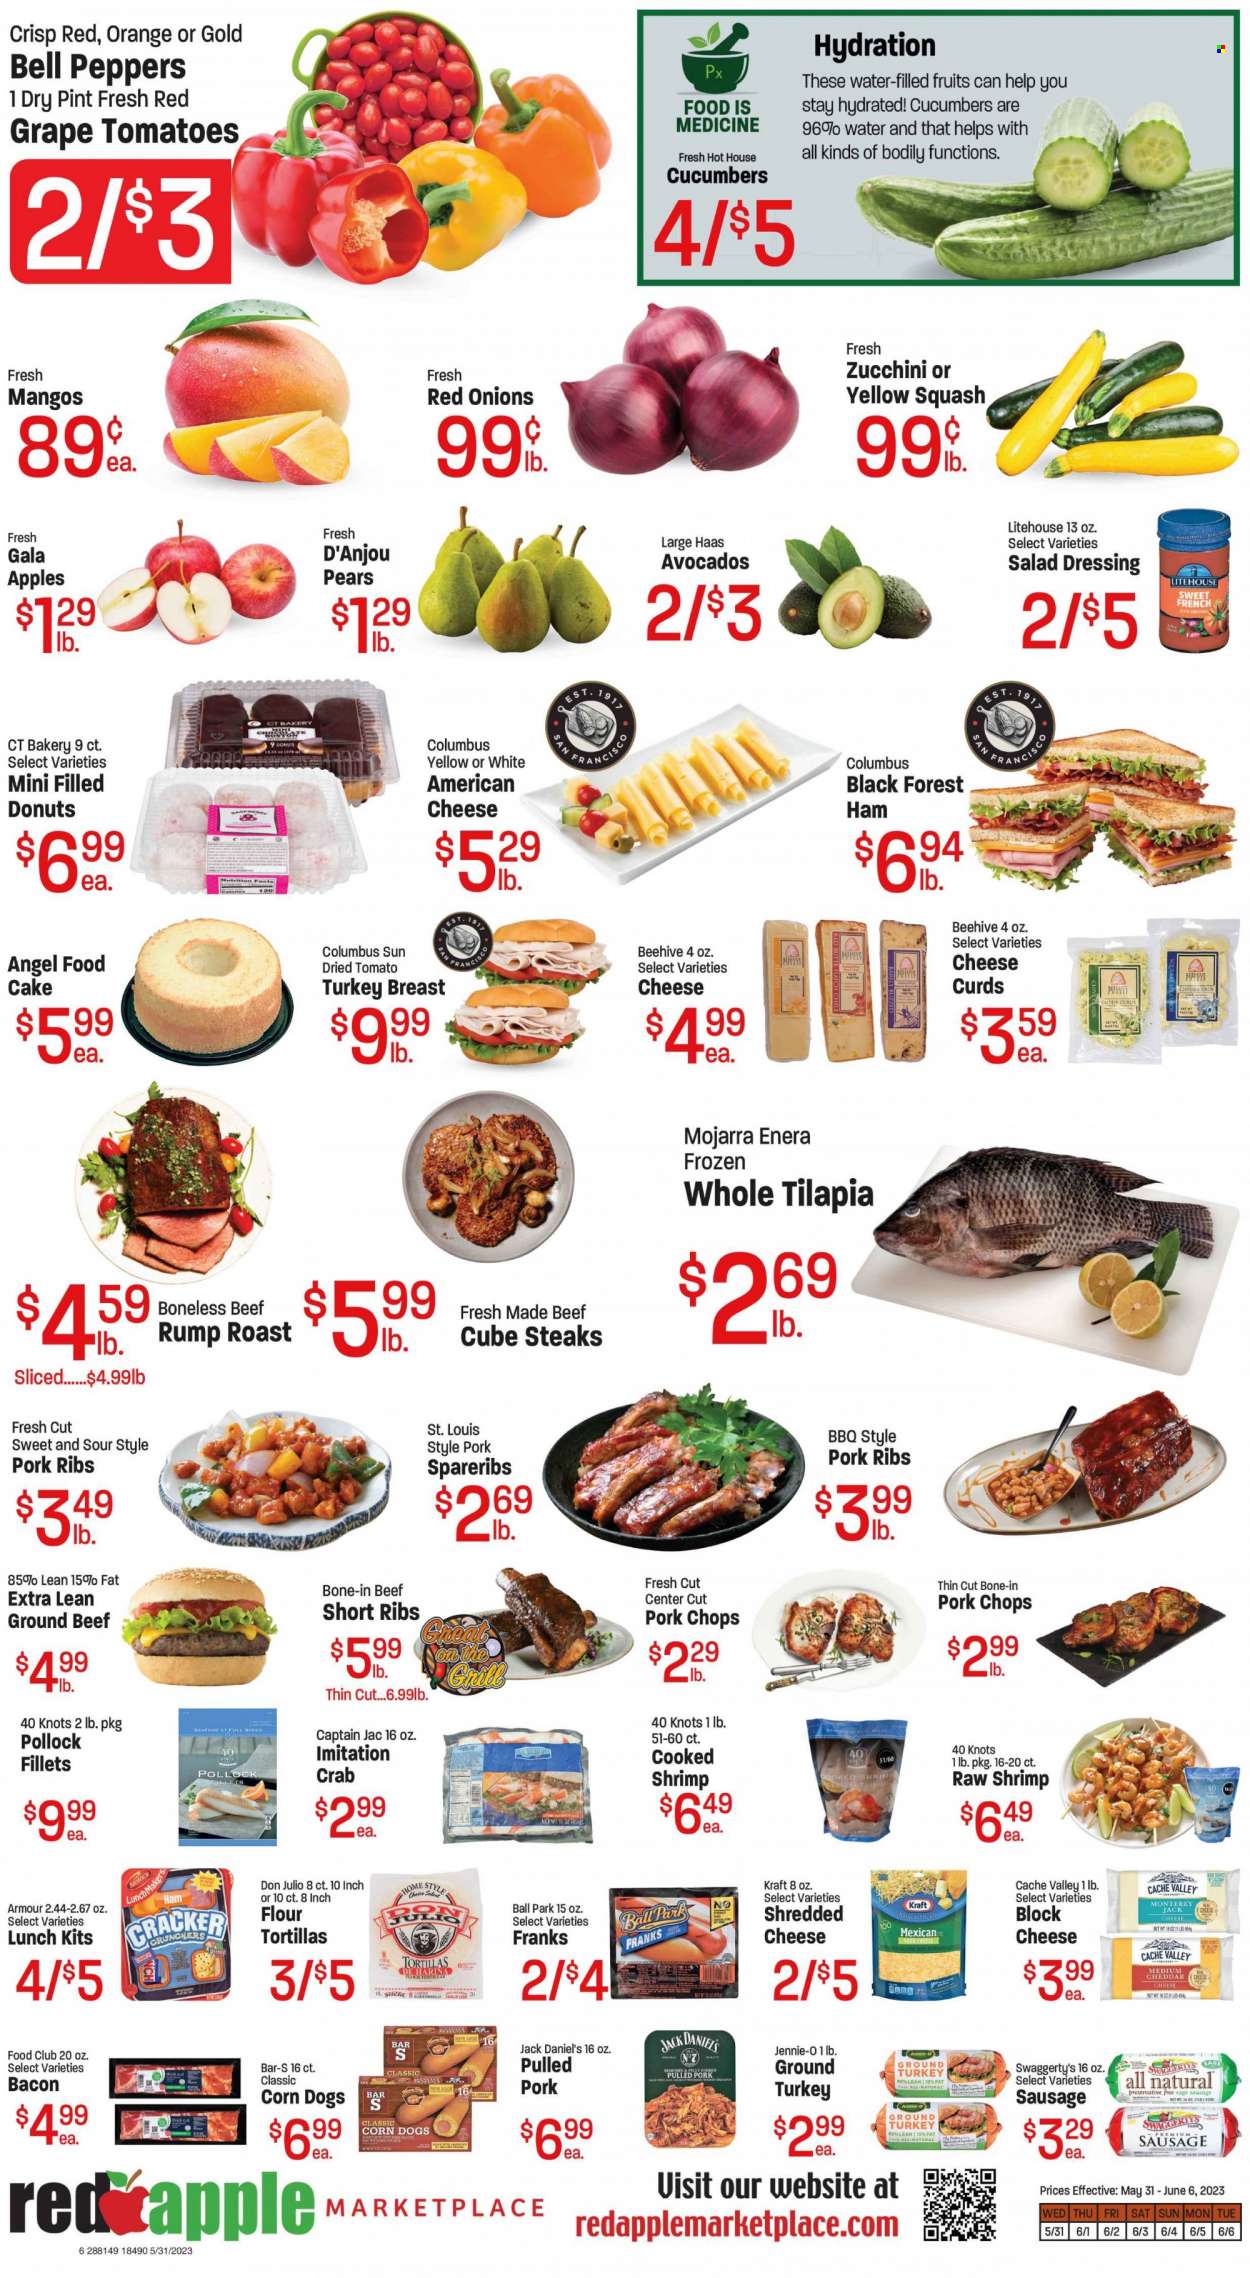 thumbnail - Red Apple Marketplace Flyer - 05/31/2023 - 06/06/2023 - Sales products - tortillas, cake, flour tortillas, donut, Angel Food, bell peppers, cucumber, red onions, tomatoes, zucchini, onion, peppers, yellow squash, apples, avocado, Gala, mango, pears, tilapia, pollock, seafood, shrimps, crab sticks, Jack Daniel's, Kraft®, pulled pork, roast, bacon, ham, sausage, frankfurters, american cheese, Monterey Jack cheese, shredded cheese, cheddar, cheese curd, dried tomatoes, salad dressing, dressing, water, ground turkey, turkey breast, turkey, beef meat, beef ribs, ground beef, steak, ribs, pork chops, pork meat, pork ribs, pork spare ribs. Page 6.